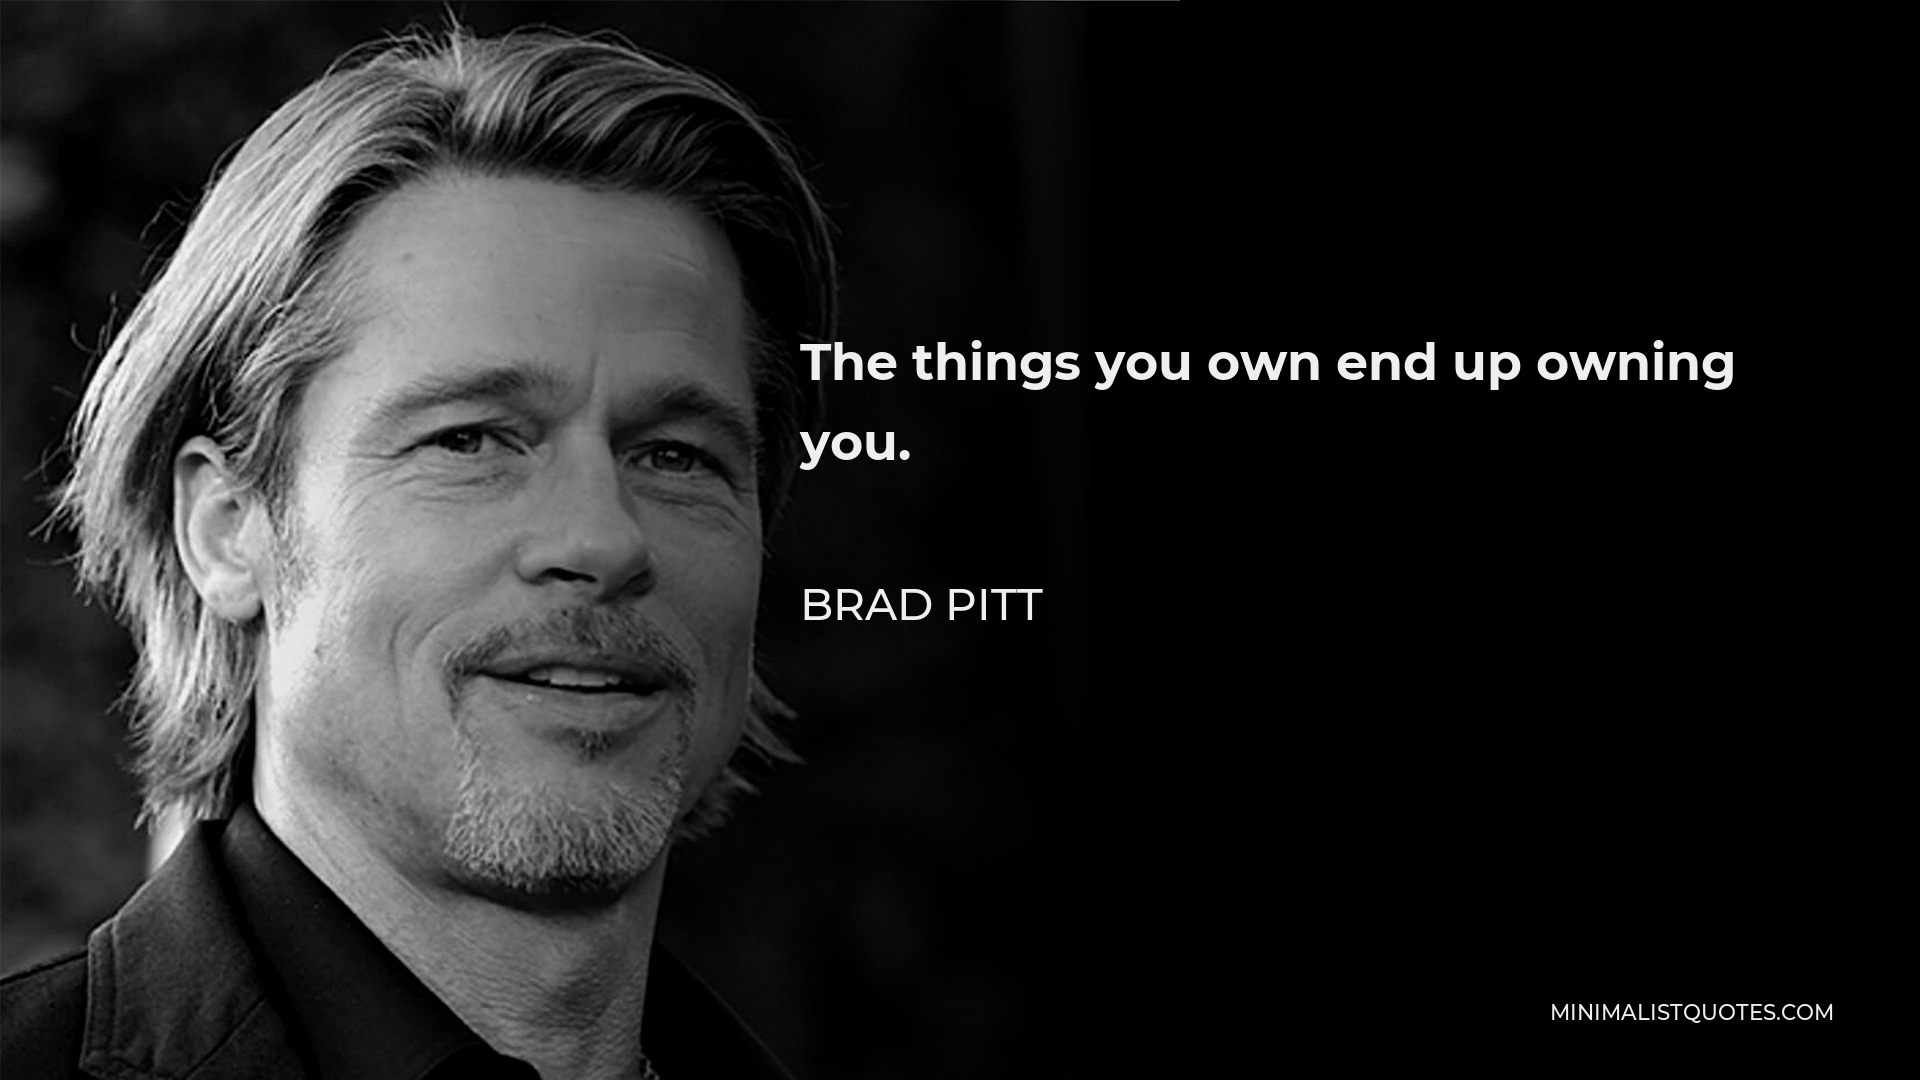 Brad Pitt Quote - The things you own end up owning you.